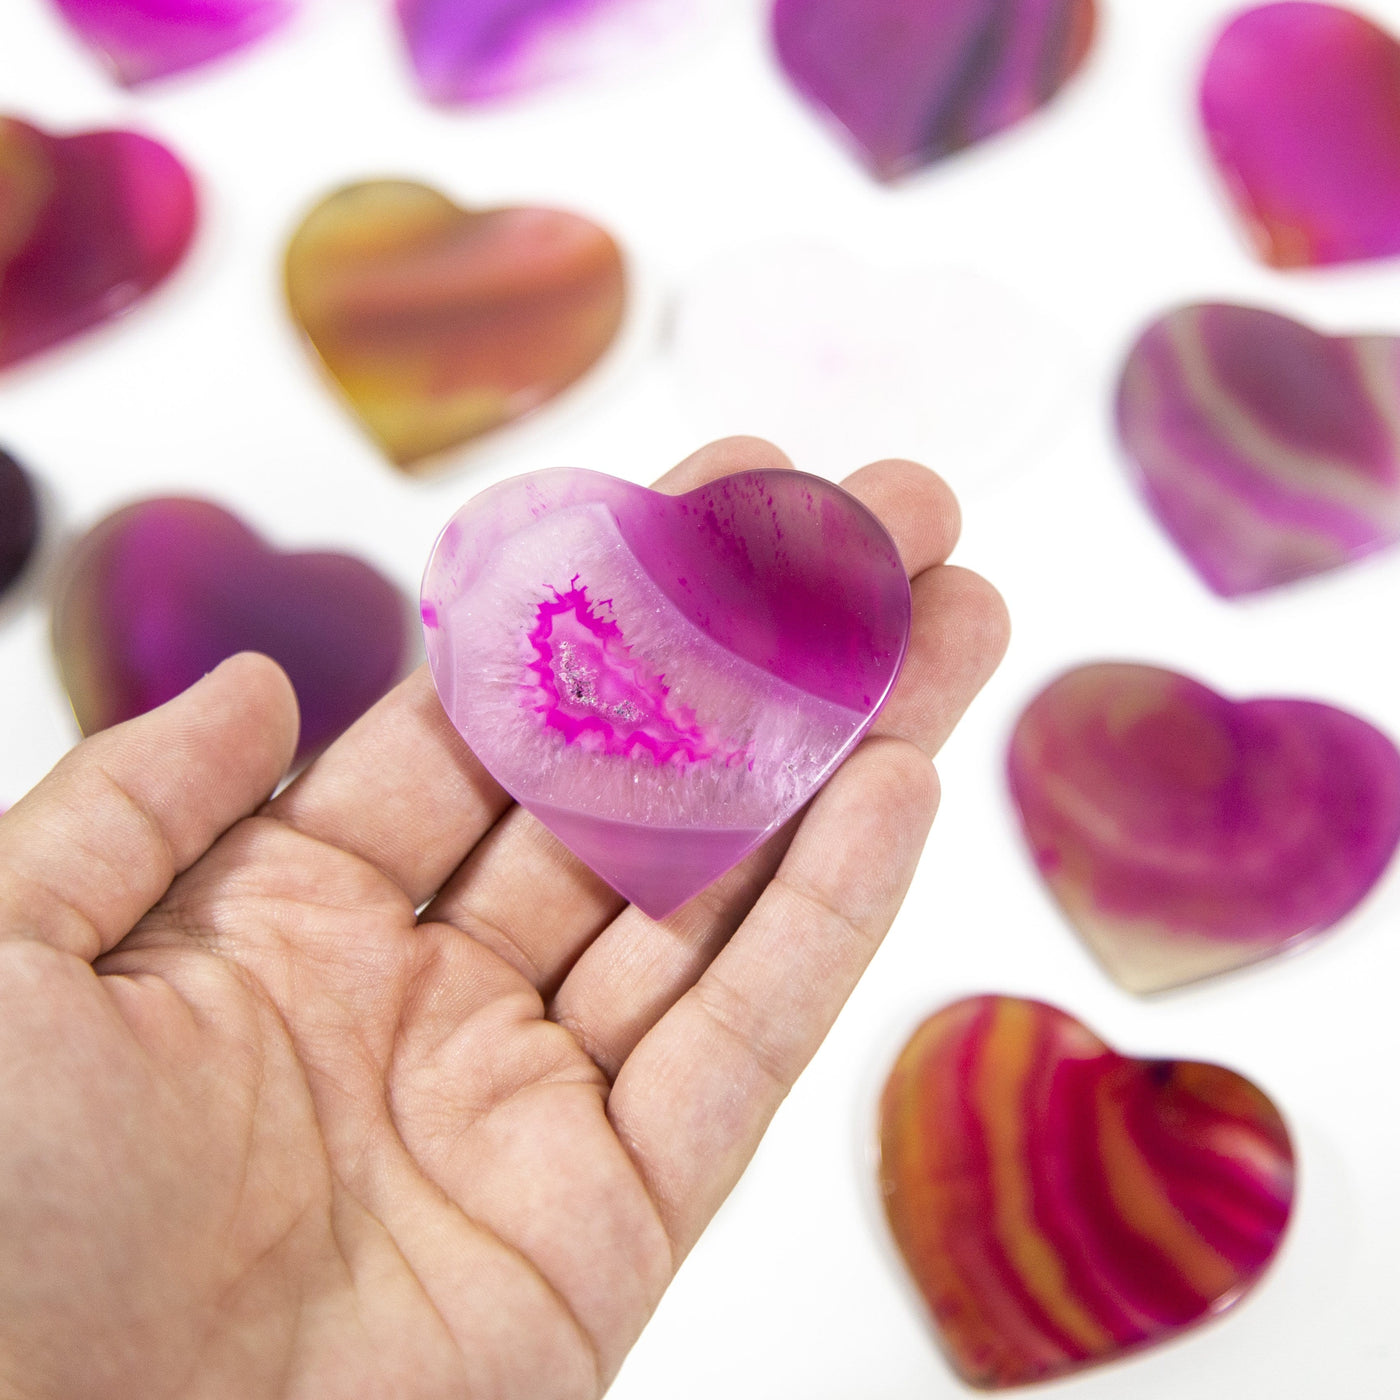 A pink Agate Heart Shaped Cabochon in a hand, multiple agate hearts in the background on a white surface.